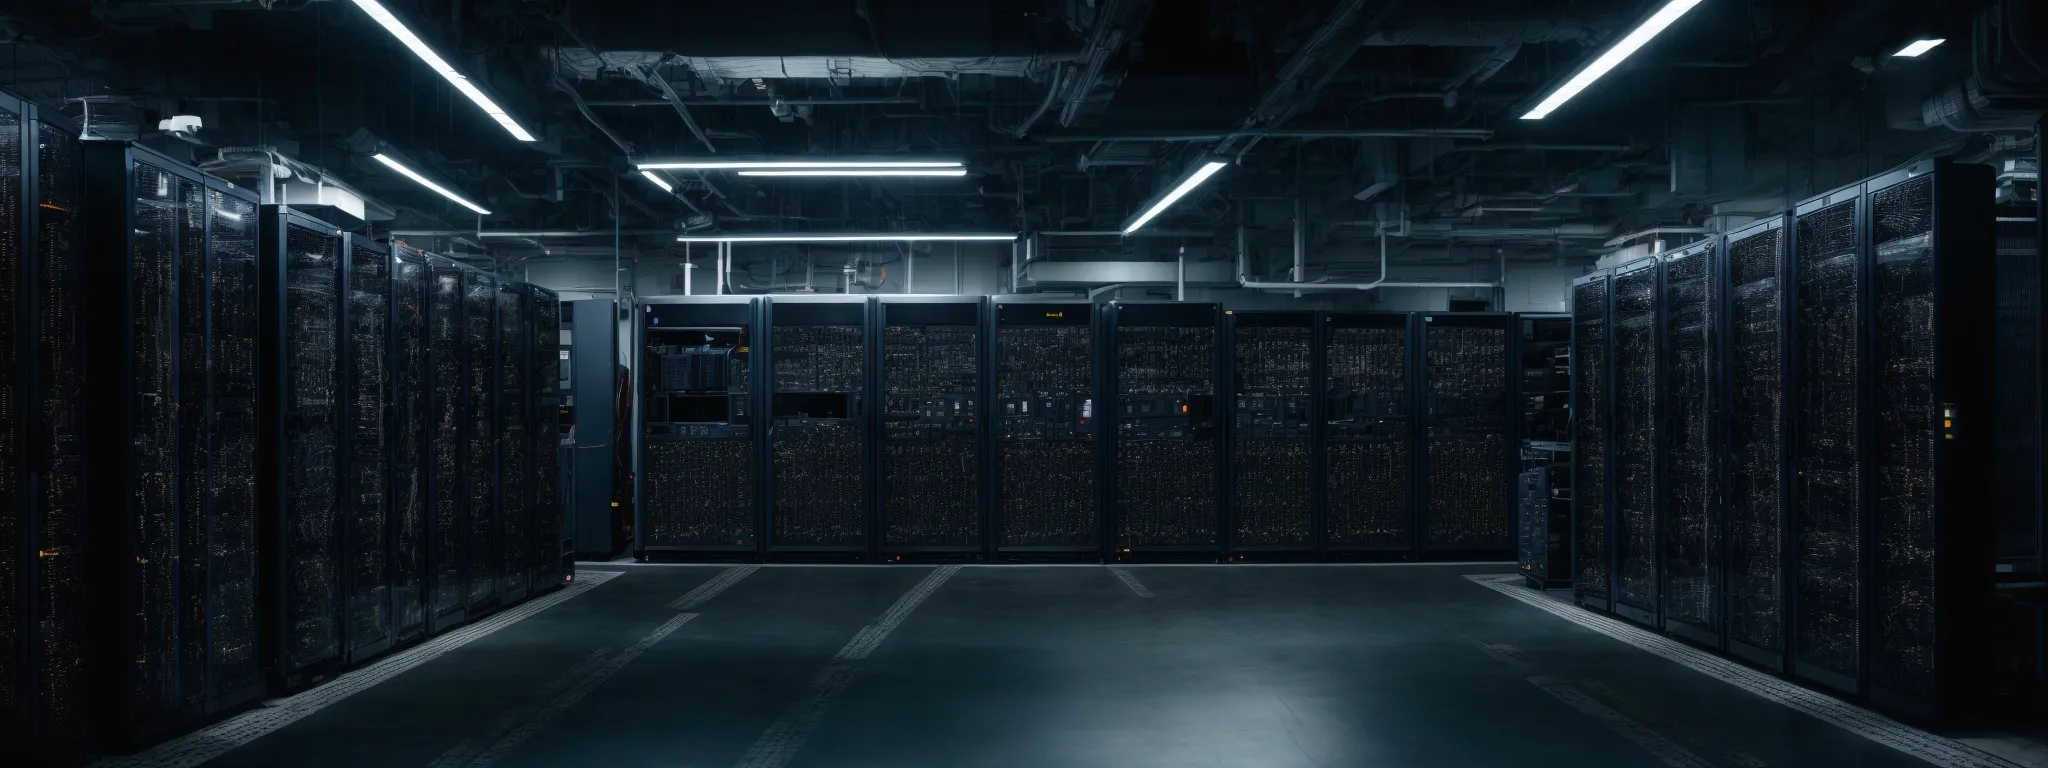 a vast server room with racks of computers performing automated data processing.